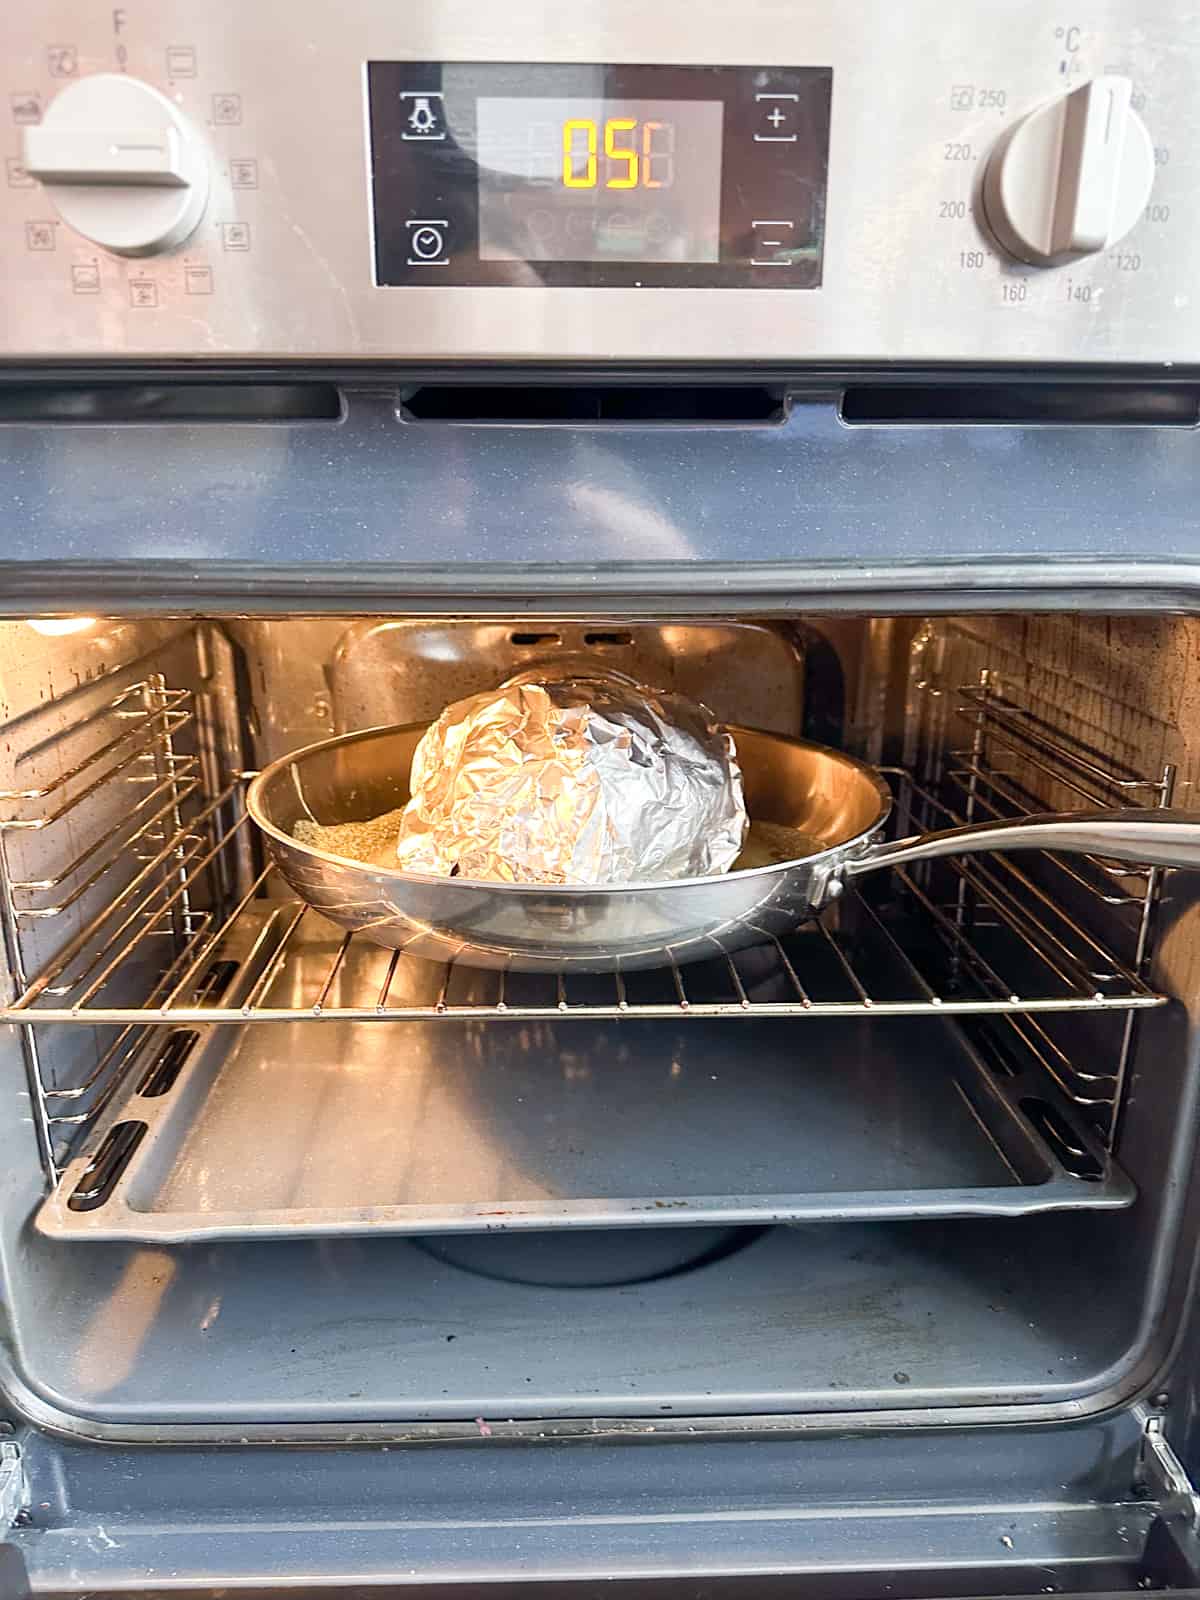 A large pan with a piece of meat covered in foil place on a shelf in the oven.